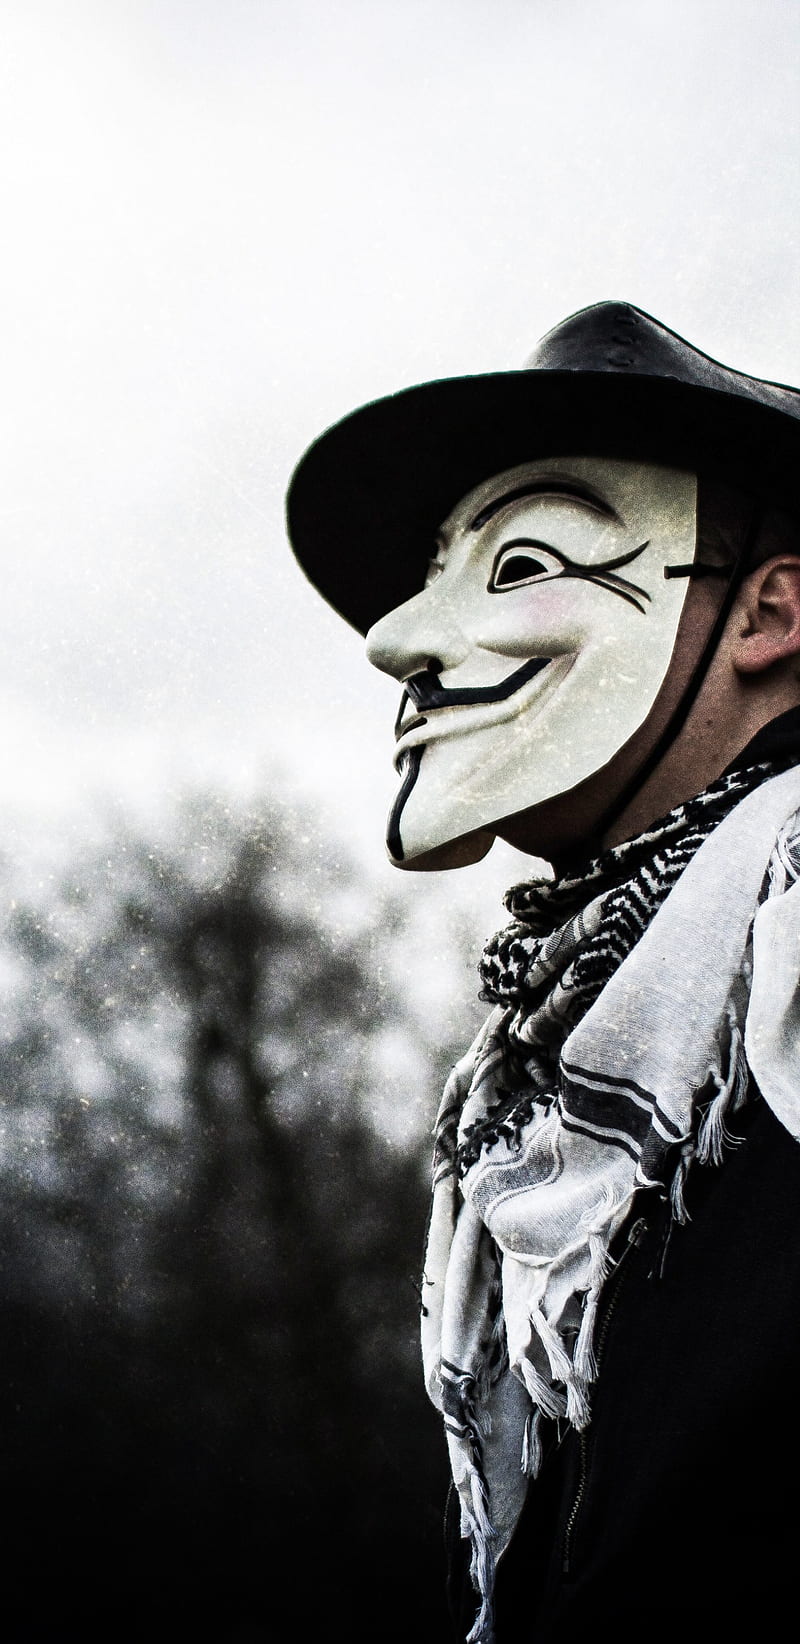 Anonymous Mask, anon, hack, hacked, hacker, masked, steamroom, tech, technology, HD phone wallpaper